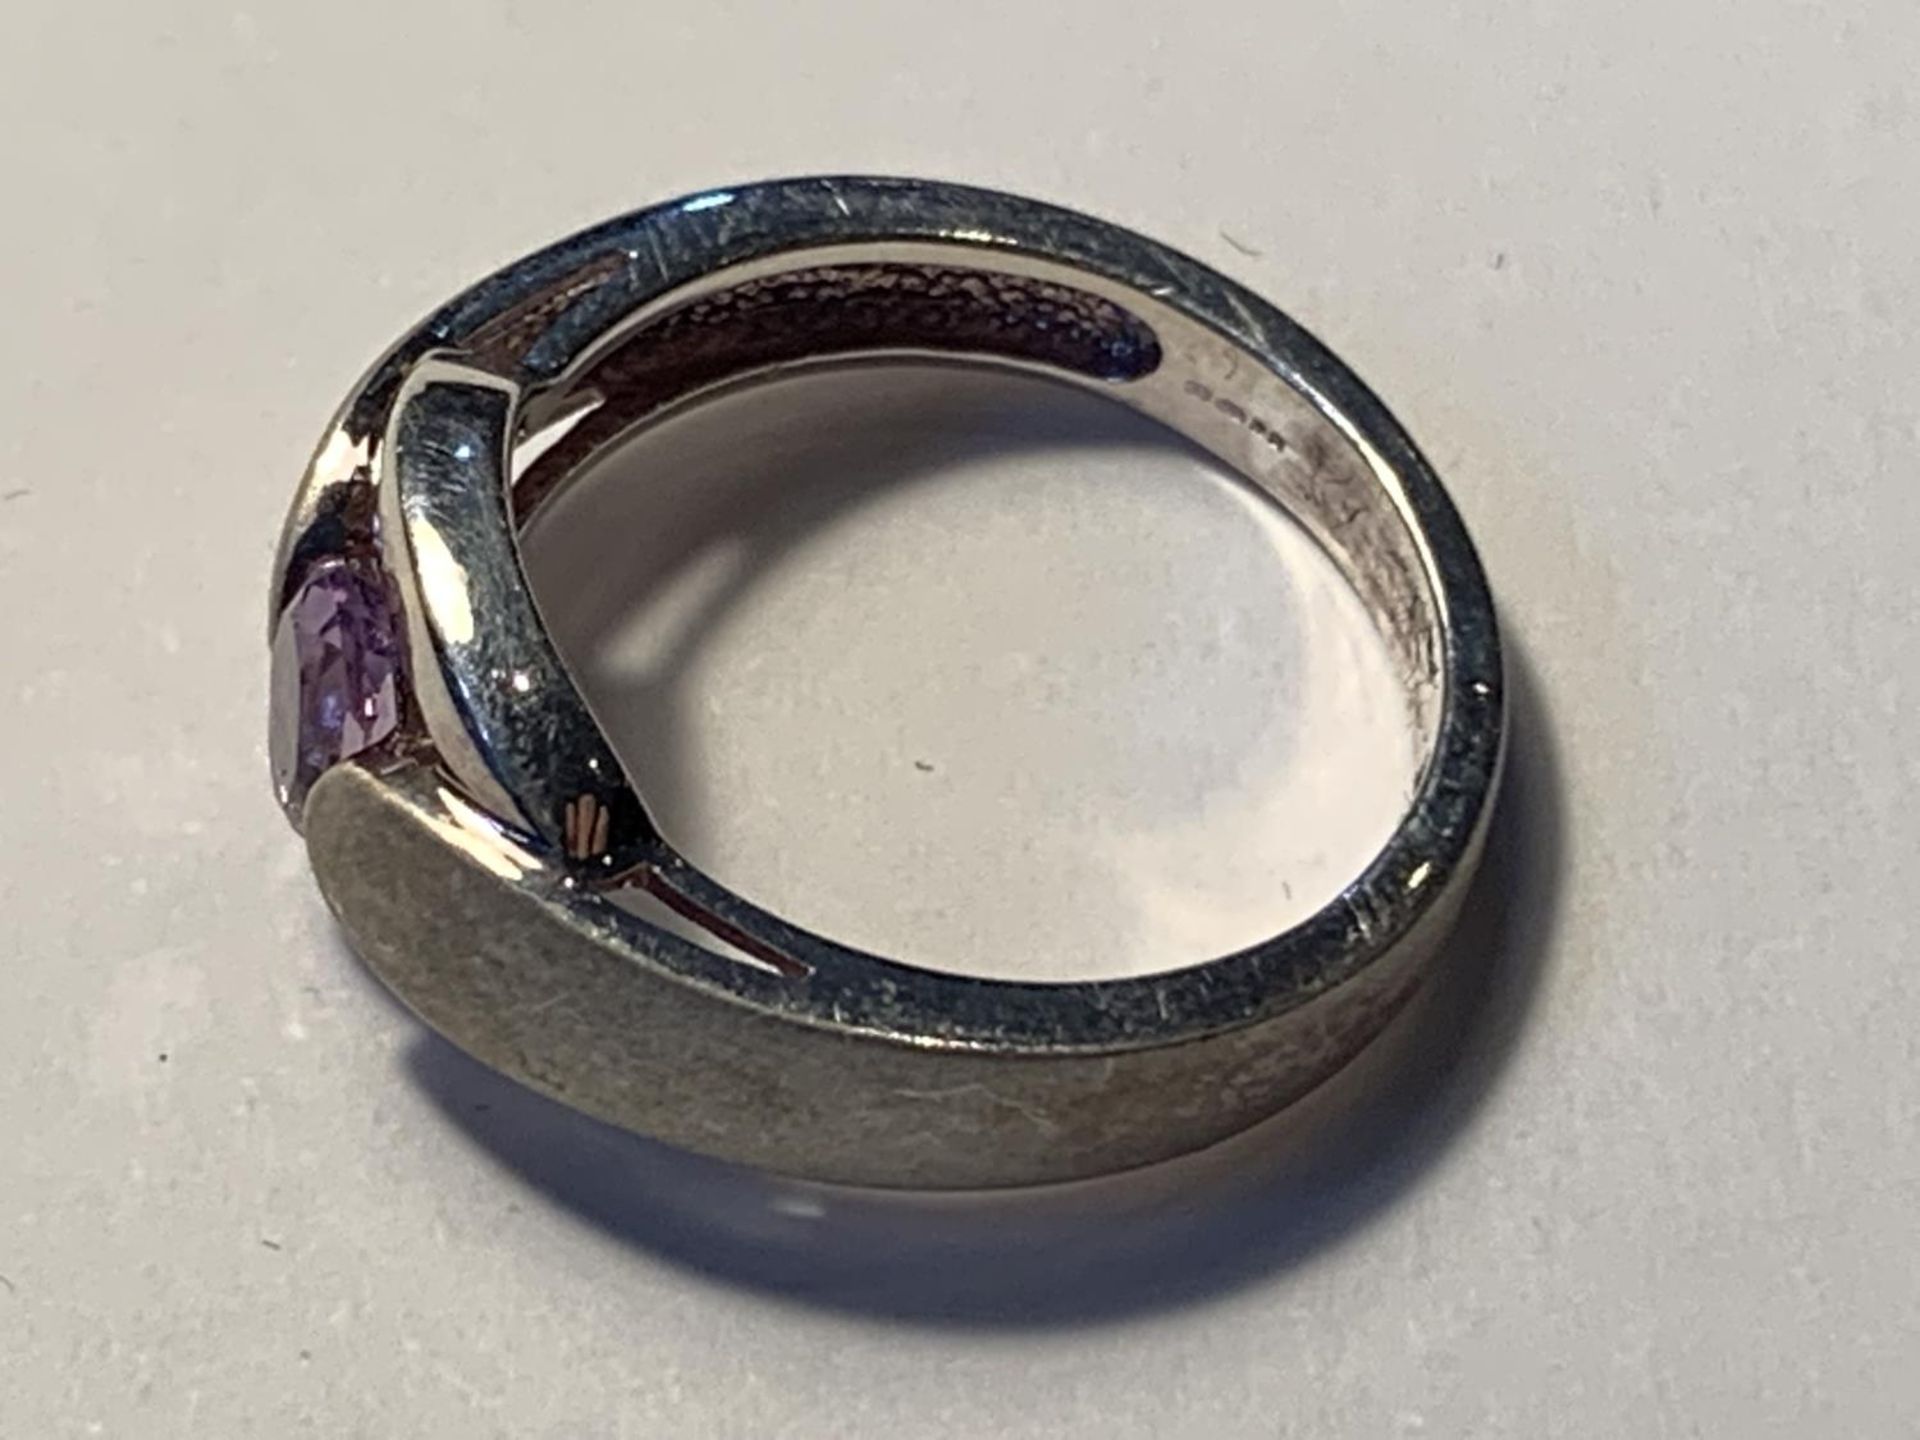 A SILVER AND AMETHYST RING IN A PRESENTATION BOX - Image 3 of 5